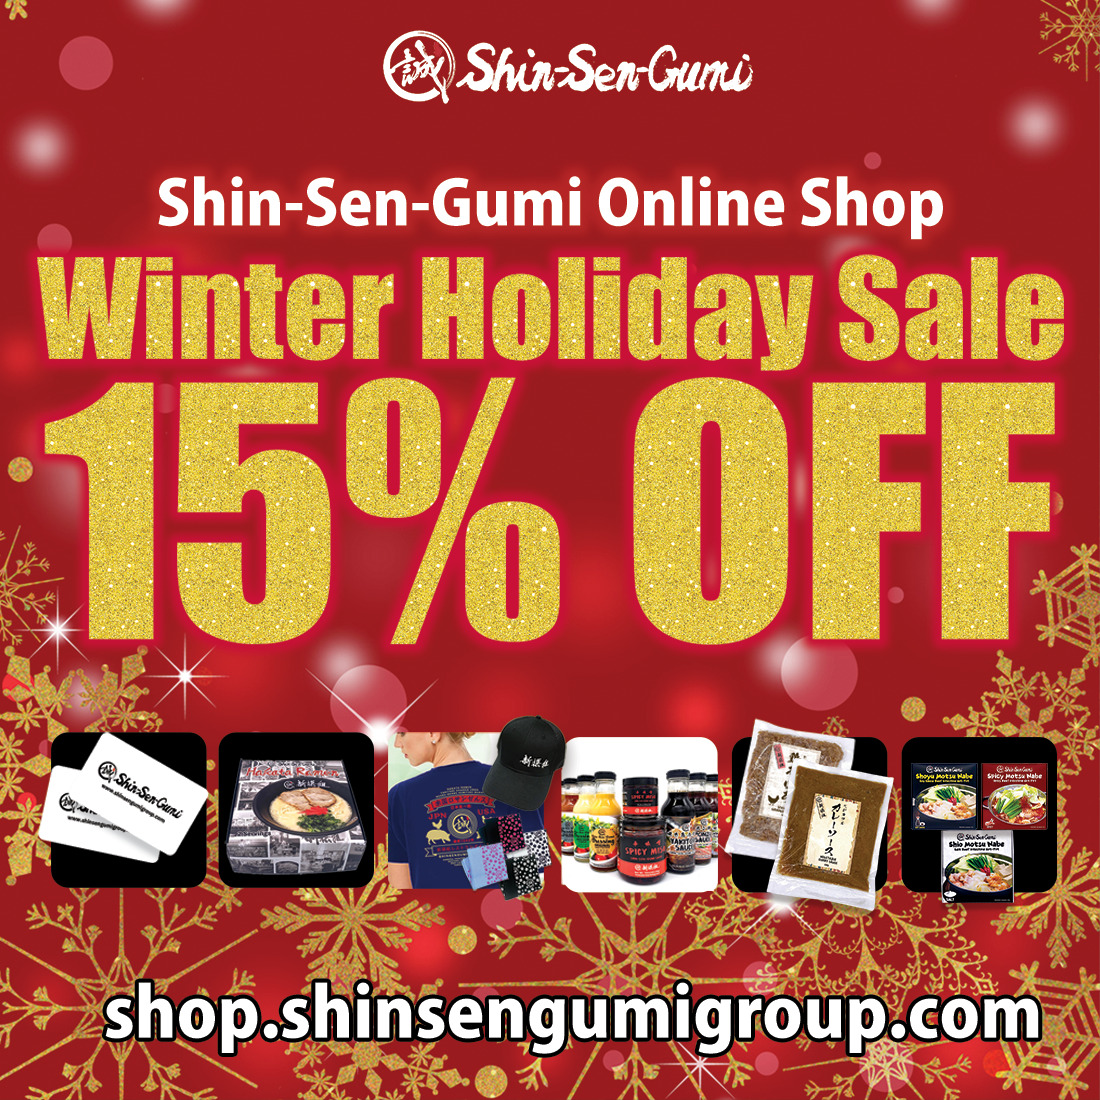 There are golden snowflake decorations on a red background. The Shin-Sen-Gumi logo is at the top center, and below it are the words Shin-Sen-Gumi Online SHop Winter Holiday Sale 15% OFF. Below that are photos of gift cards, apparel products, and food, and below that is the URL "shop.shinsengumigroup.com."